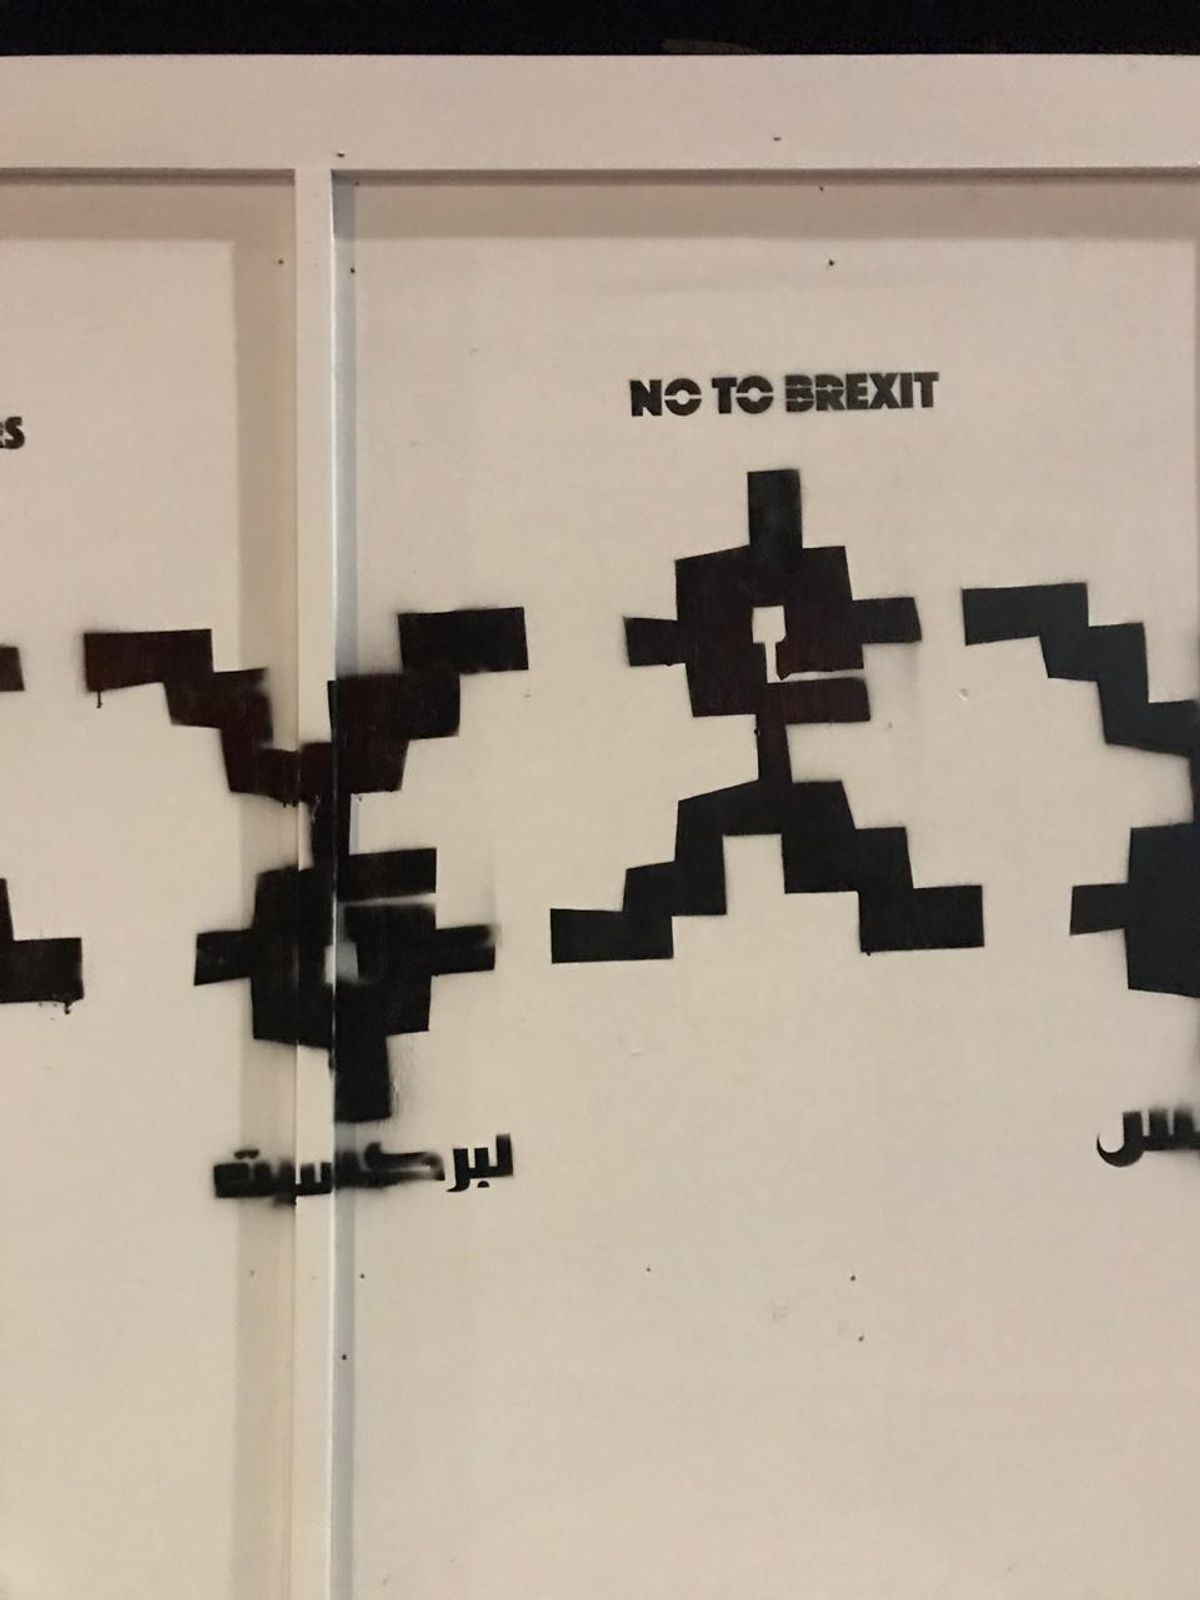 Bahia Shehab's latest political graffiti work in London was removed within 24 hours, according to the artist Courtesy of the artist